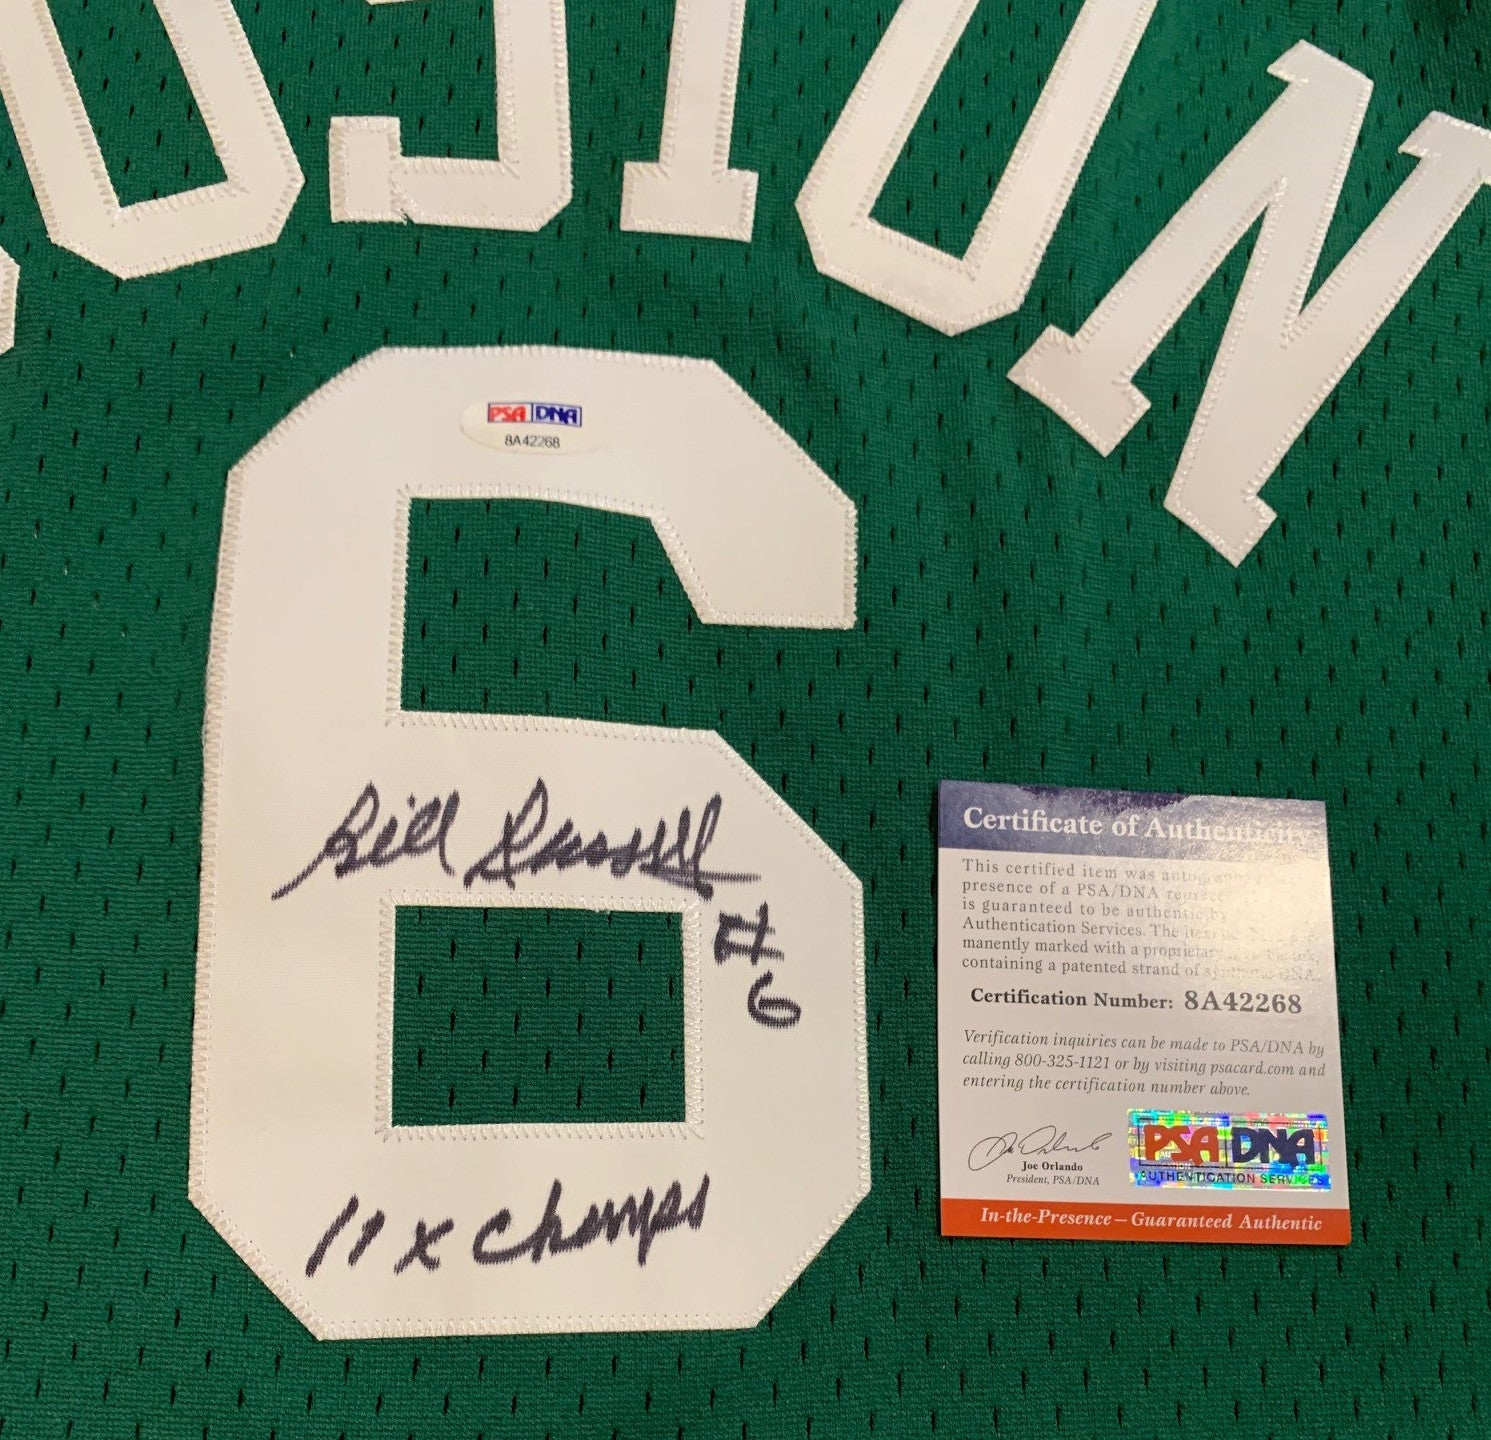 Bill Russell Signed Jersey. Nice replica of the road green jersey